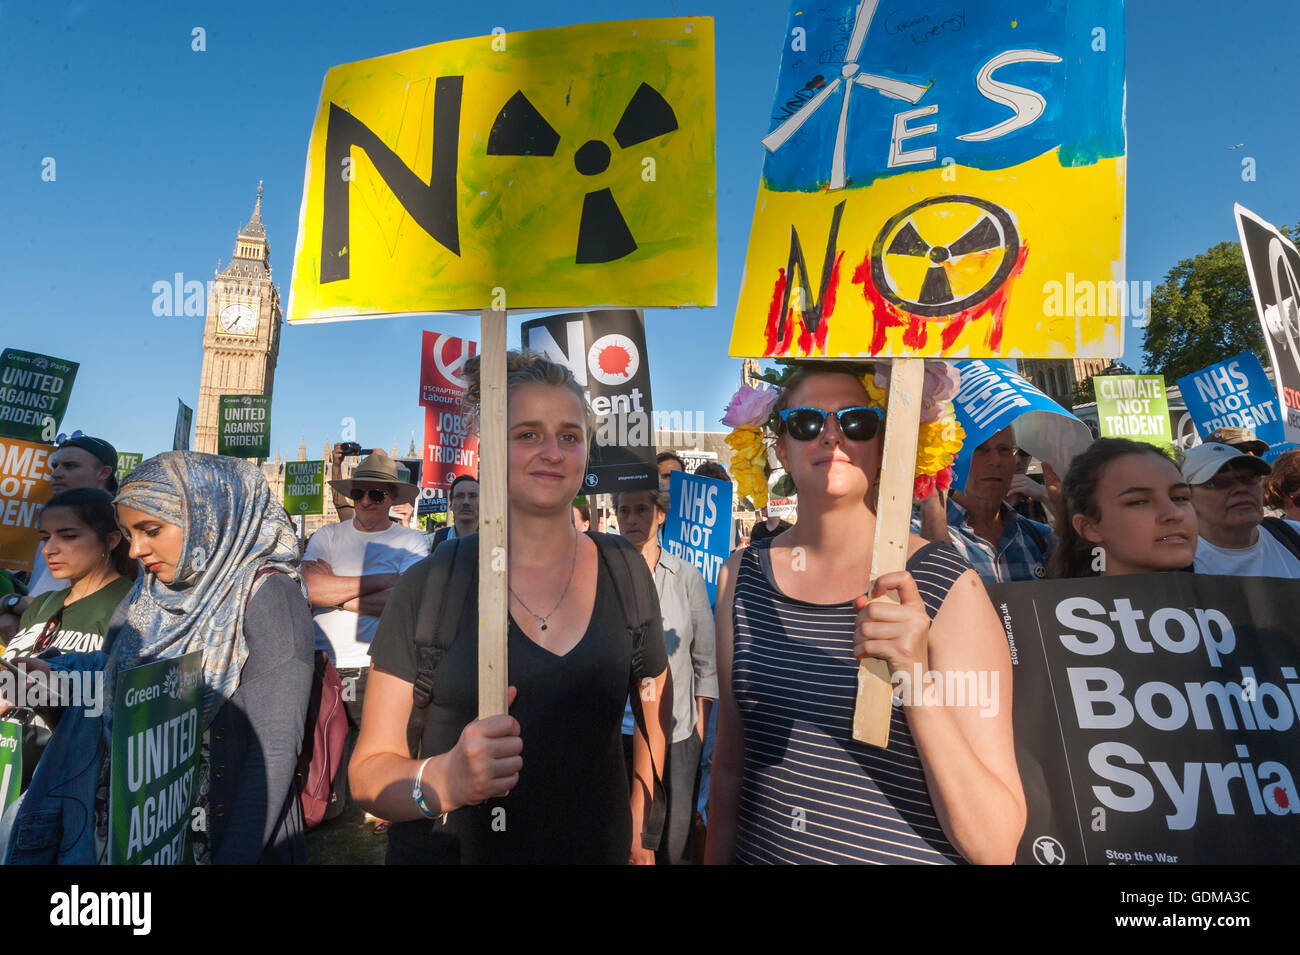 London, UK. 18th July 2016. Protesters in the crowd with hand-painted placards at the CND rally outside Parliament taking place as the replacement for the UK's Trident nuclear submarines was being debated. Speakers included MPs and other politicians, peace campaigners and others who stressed that the independence of Trident and the idea of deterrence were myths and the use of nuclear weapons was illegal and immoral. Credit:  Peter Marshall/Alamy Live News Stock Photo